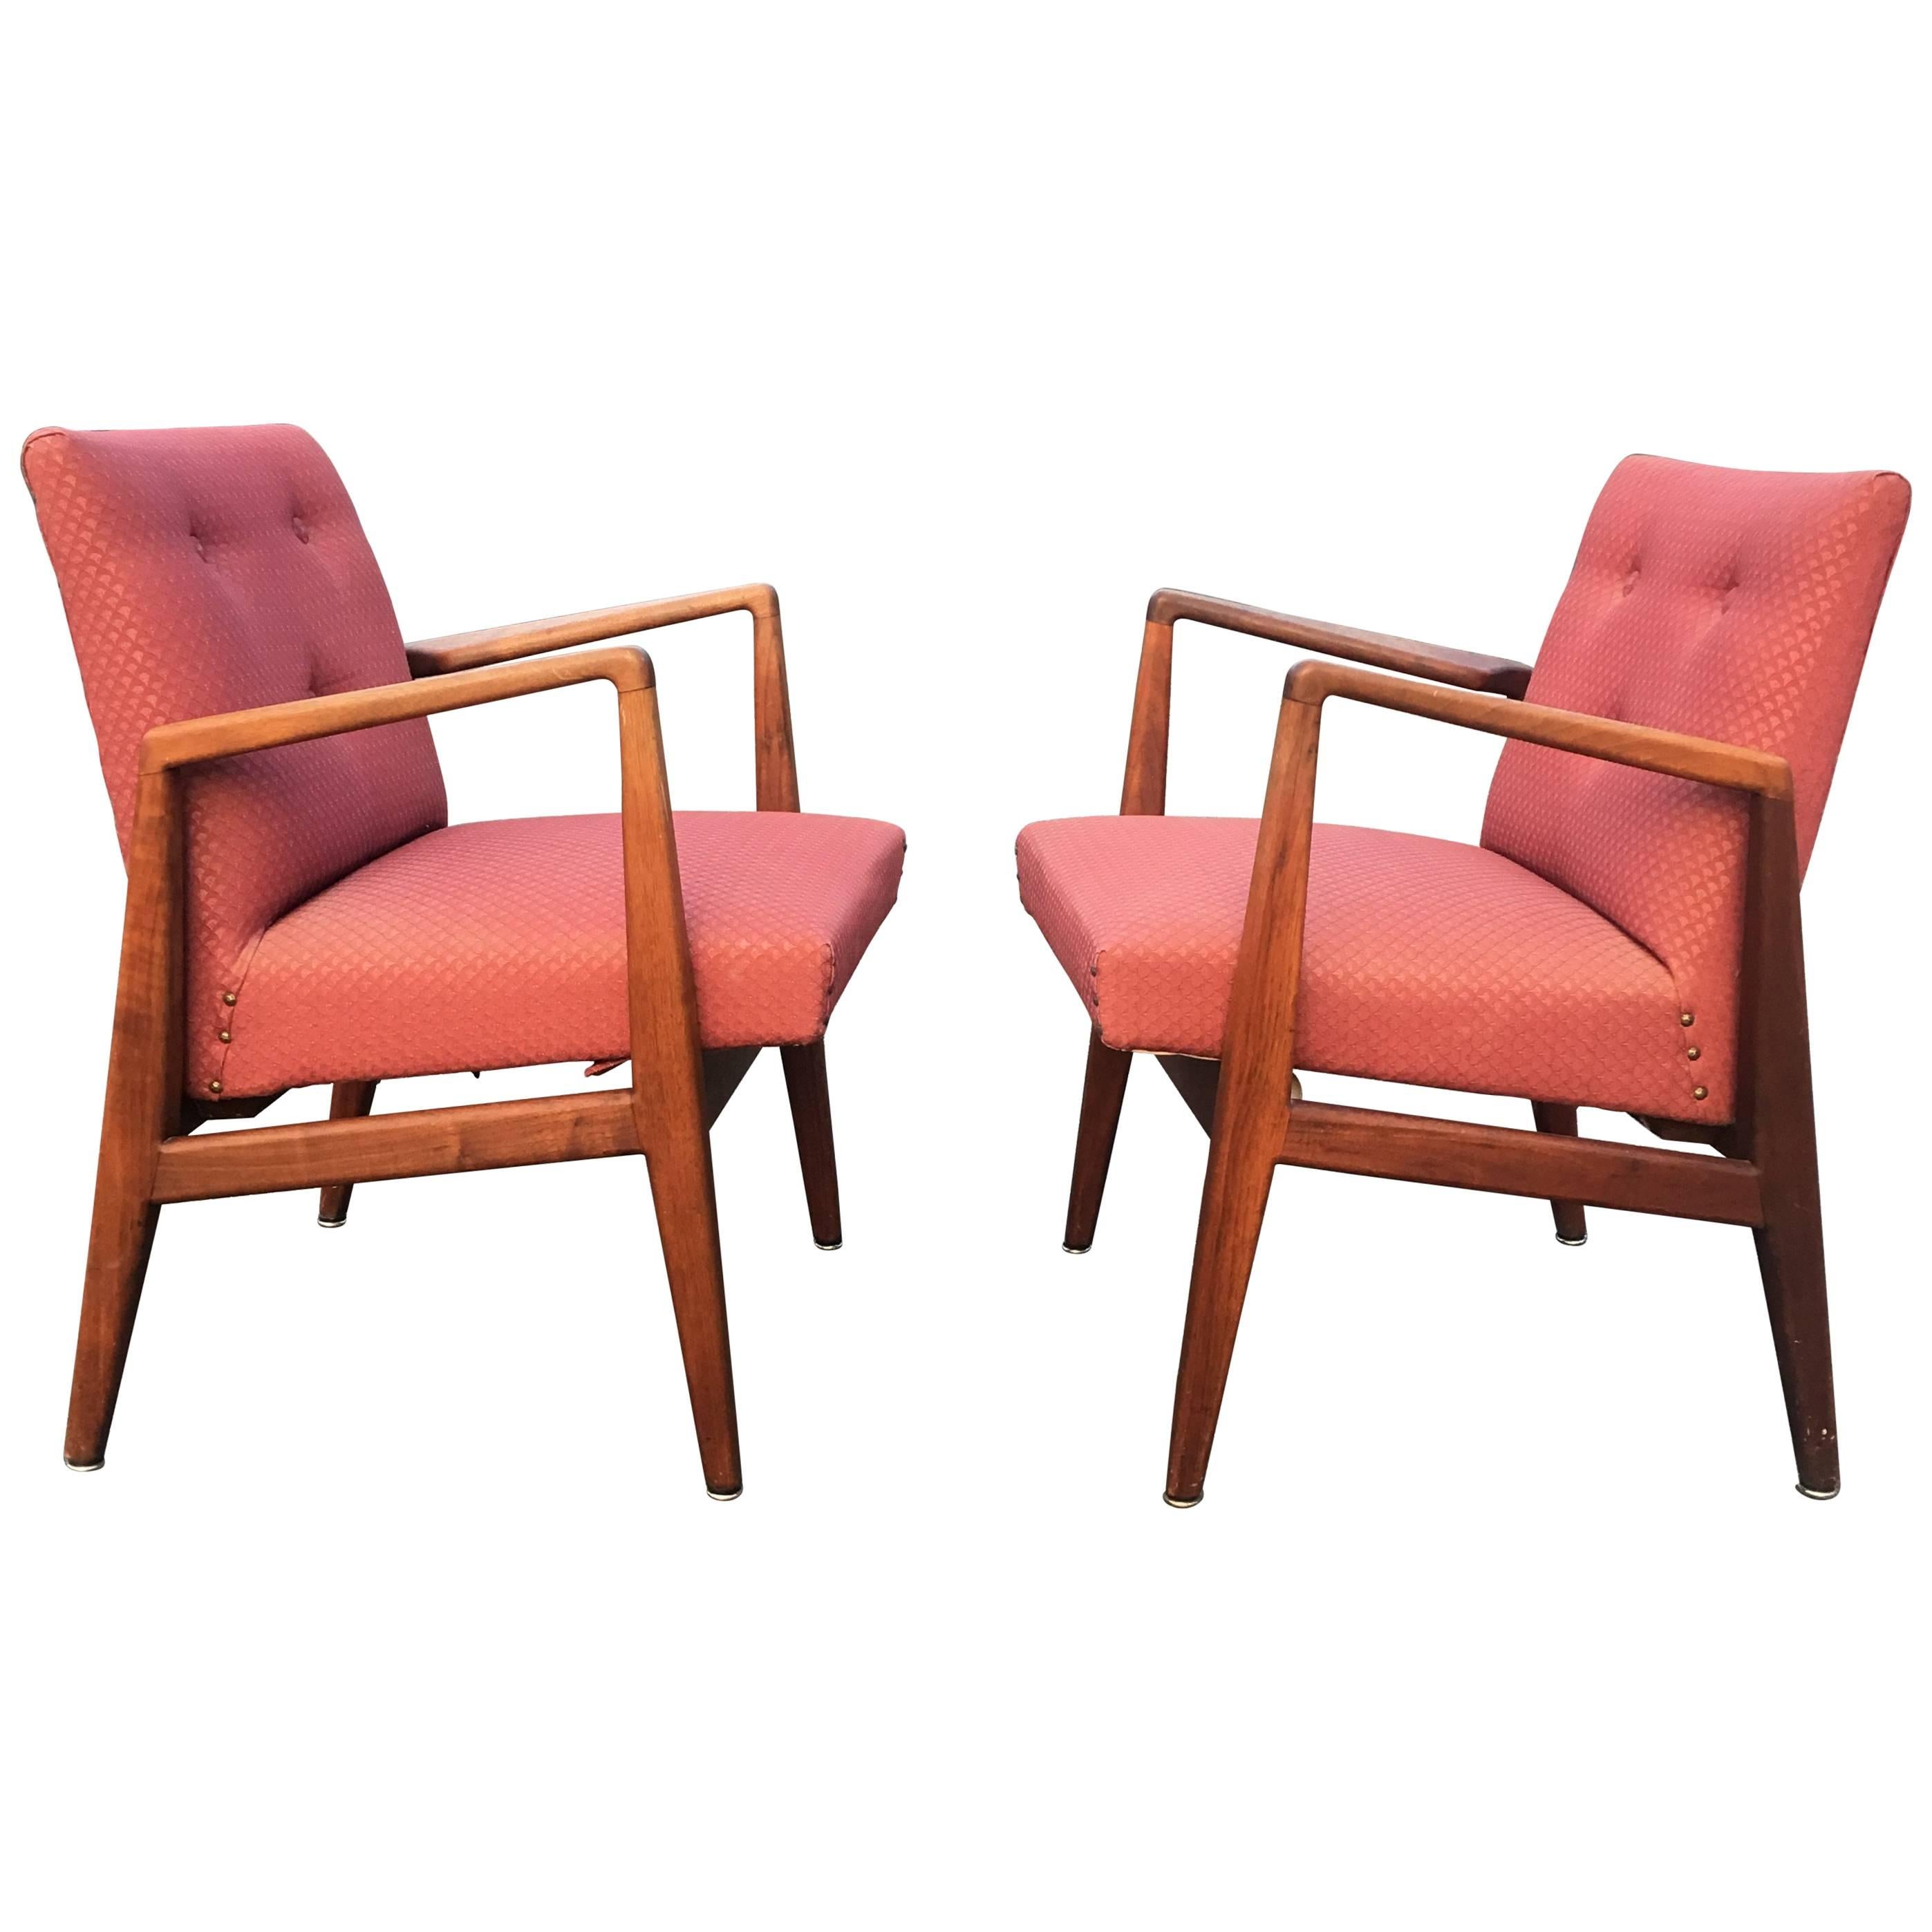 Two Gorgeous Jens Risom Sculptural Walnut Armchairs